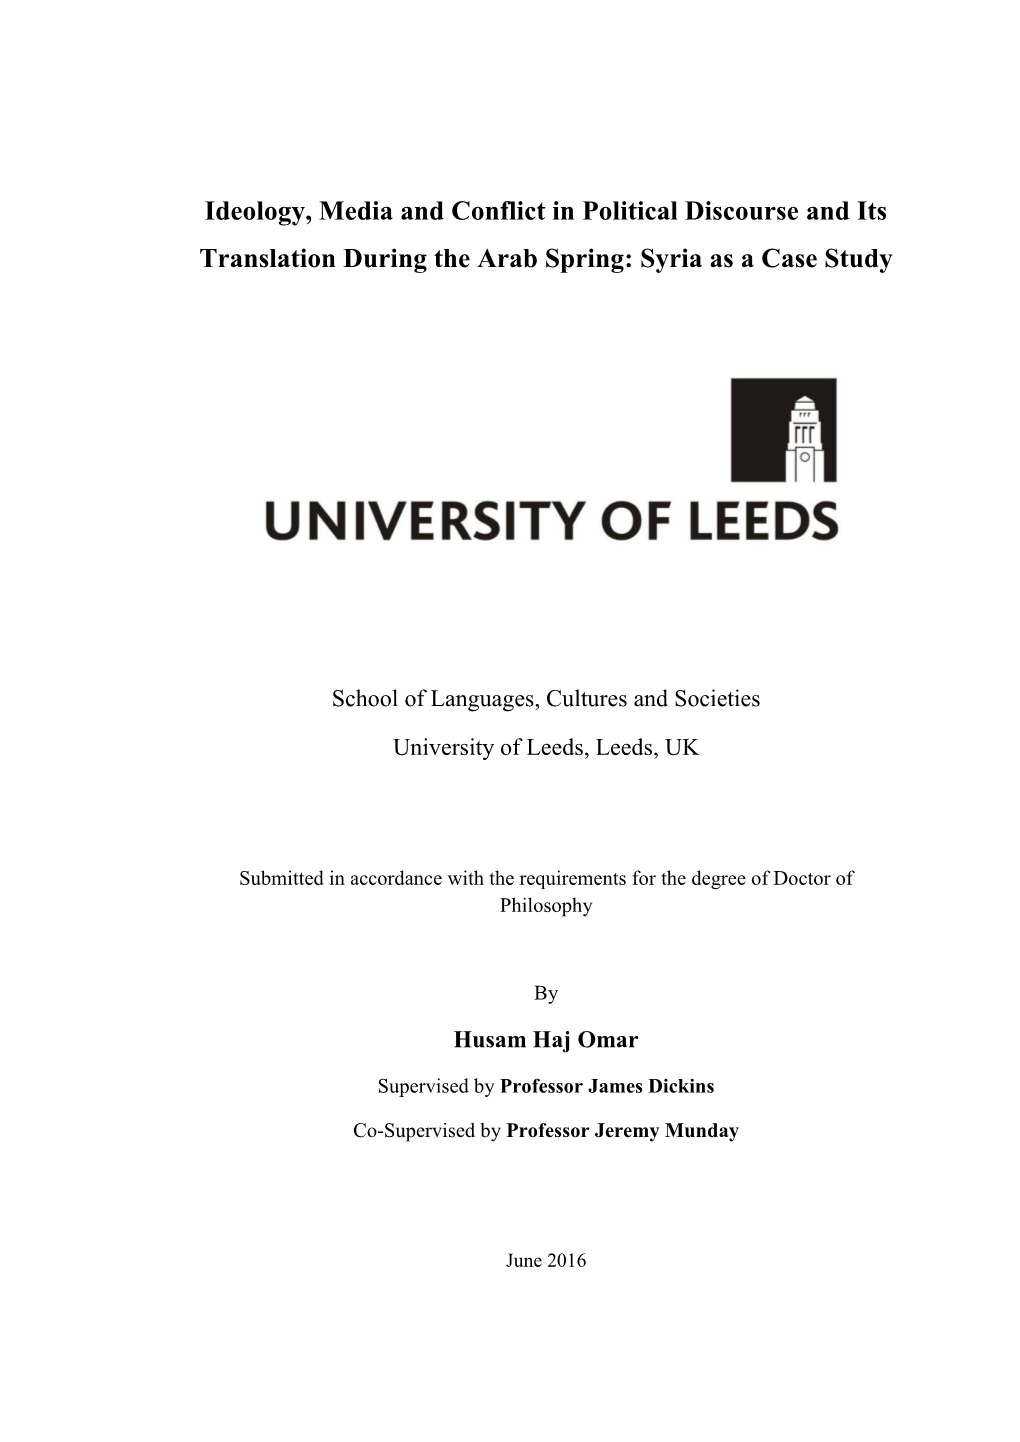 Ideology, Media and Conflict in Political Discourse and Its Translation During the Arab Spring: Syria As a Case Study